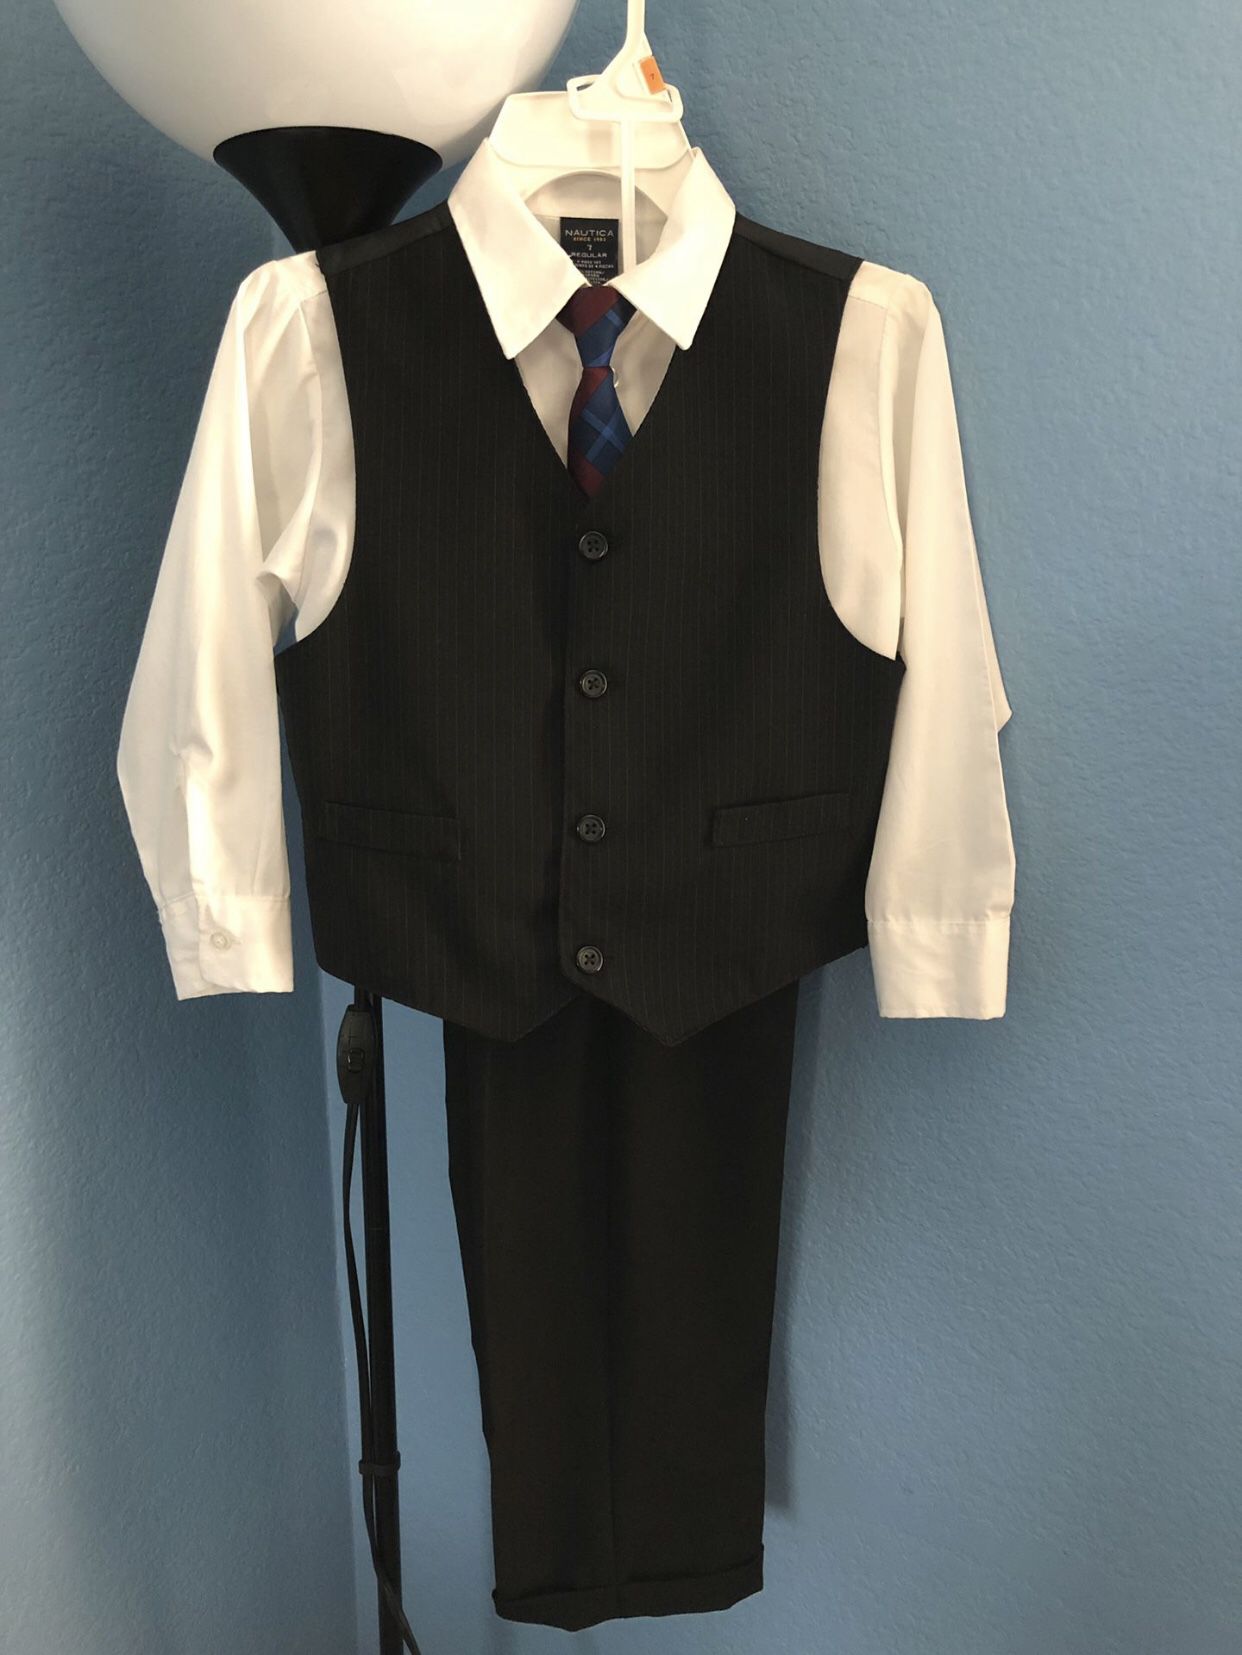 Dress suit and shoes for boys